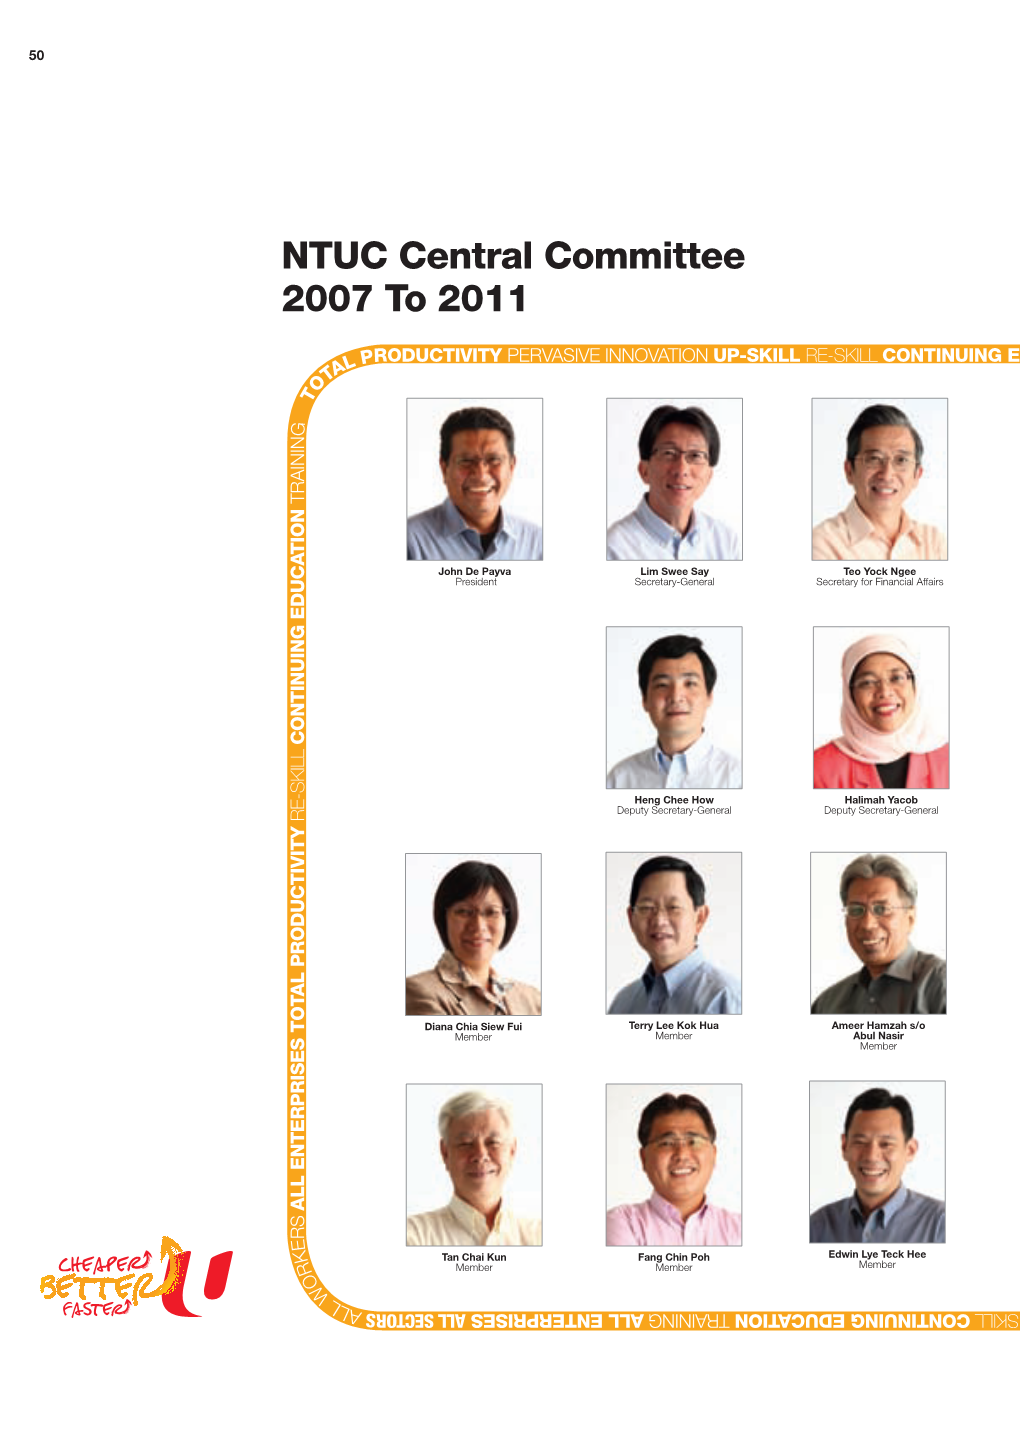 NTUC Central Committee 2007 to 2011